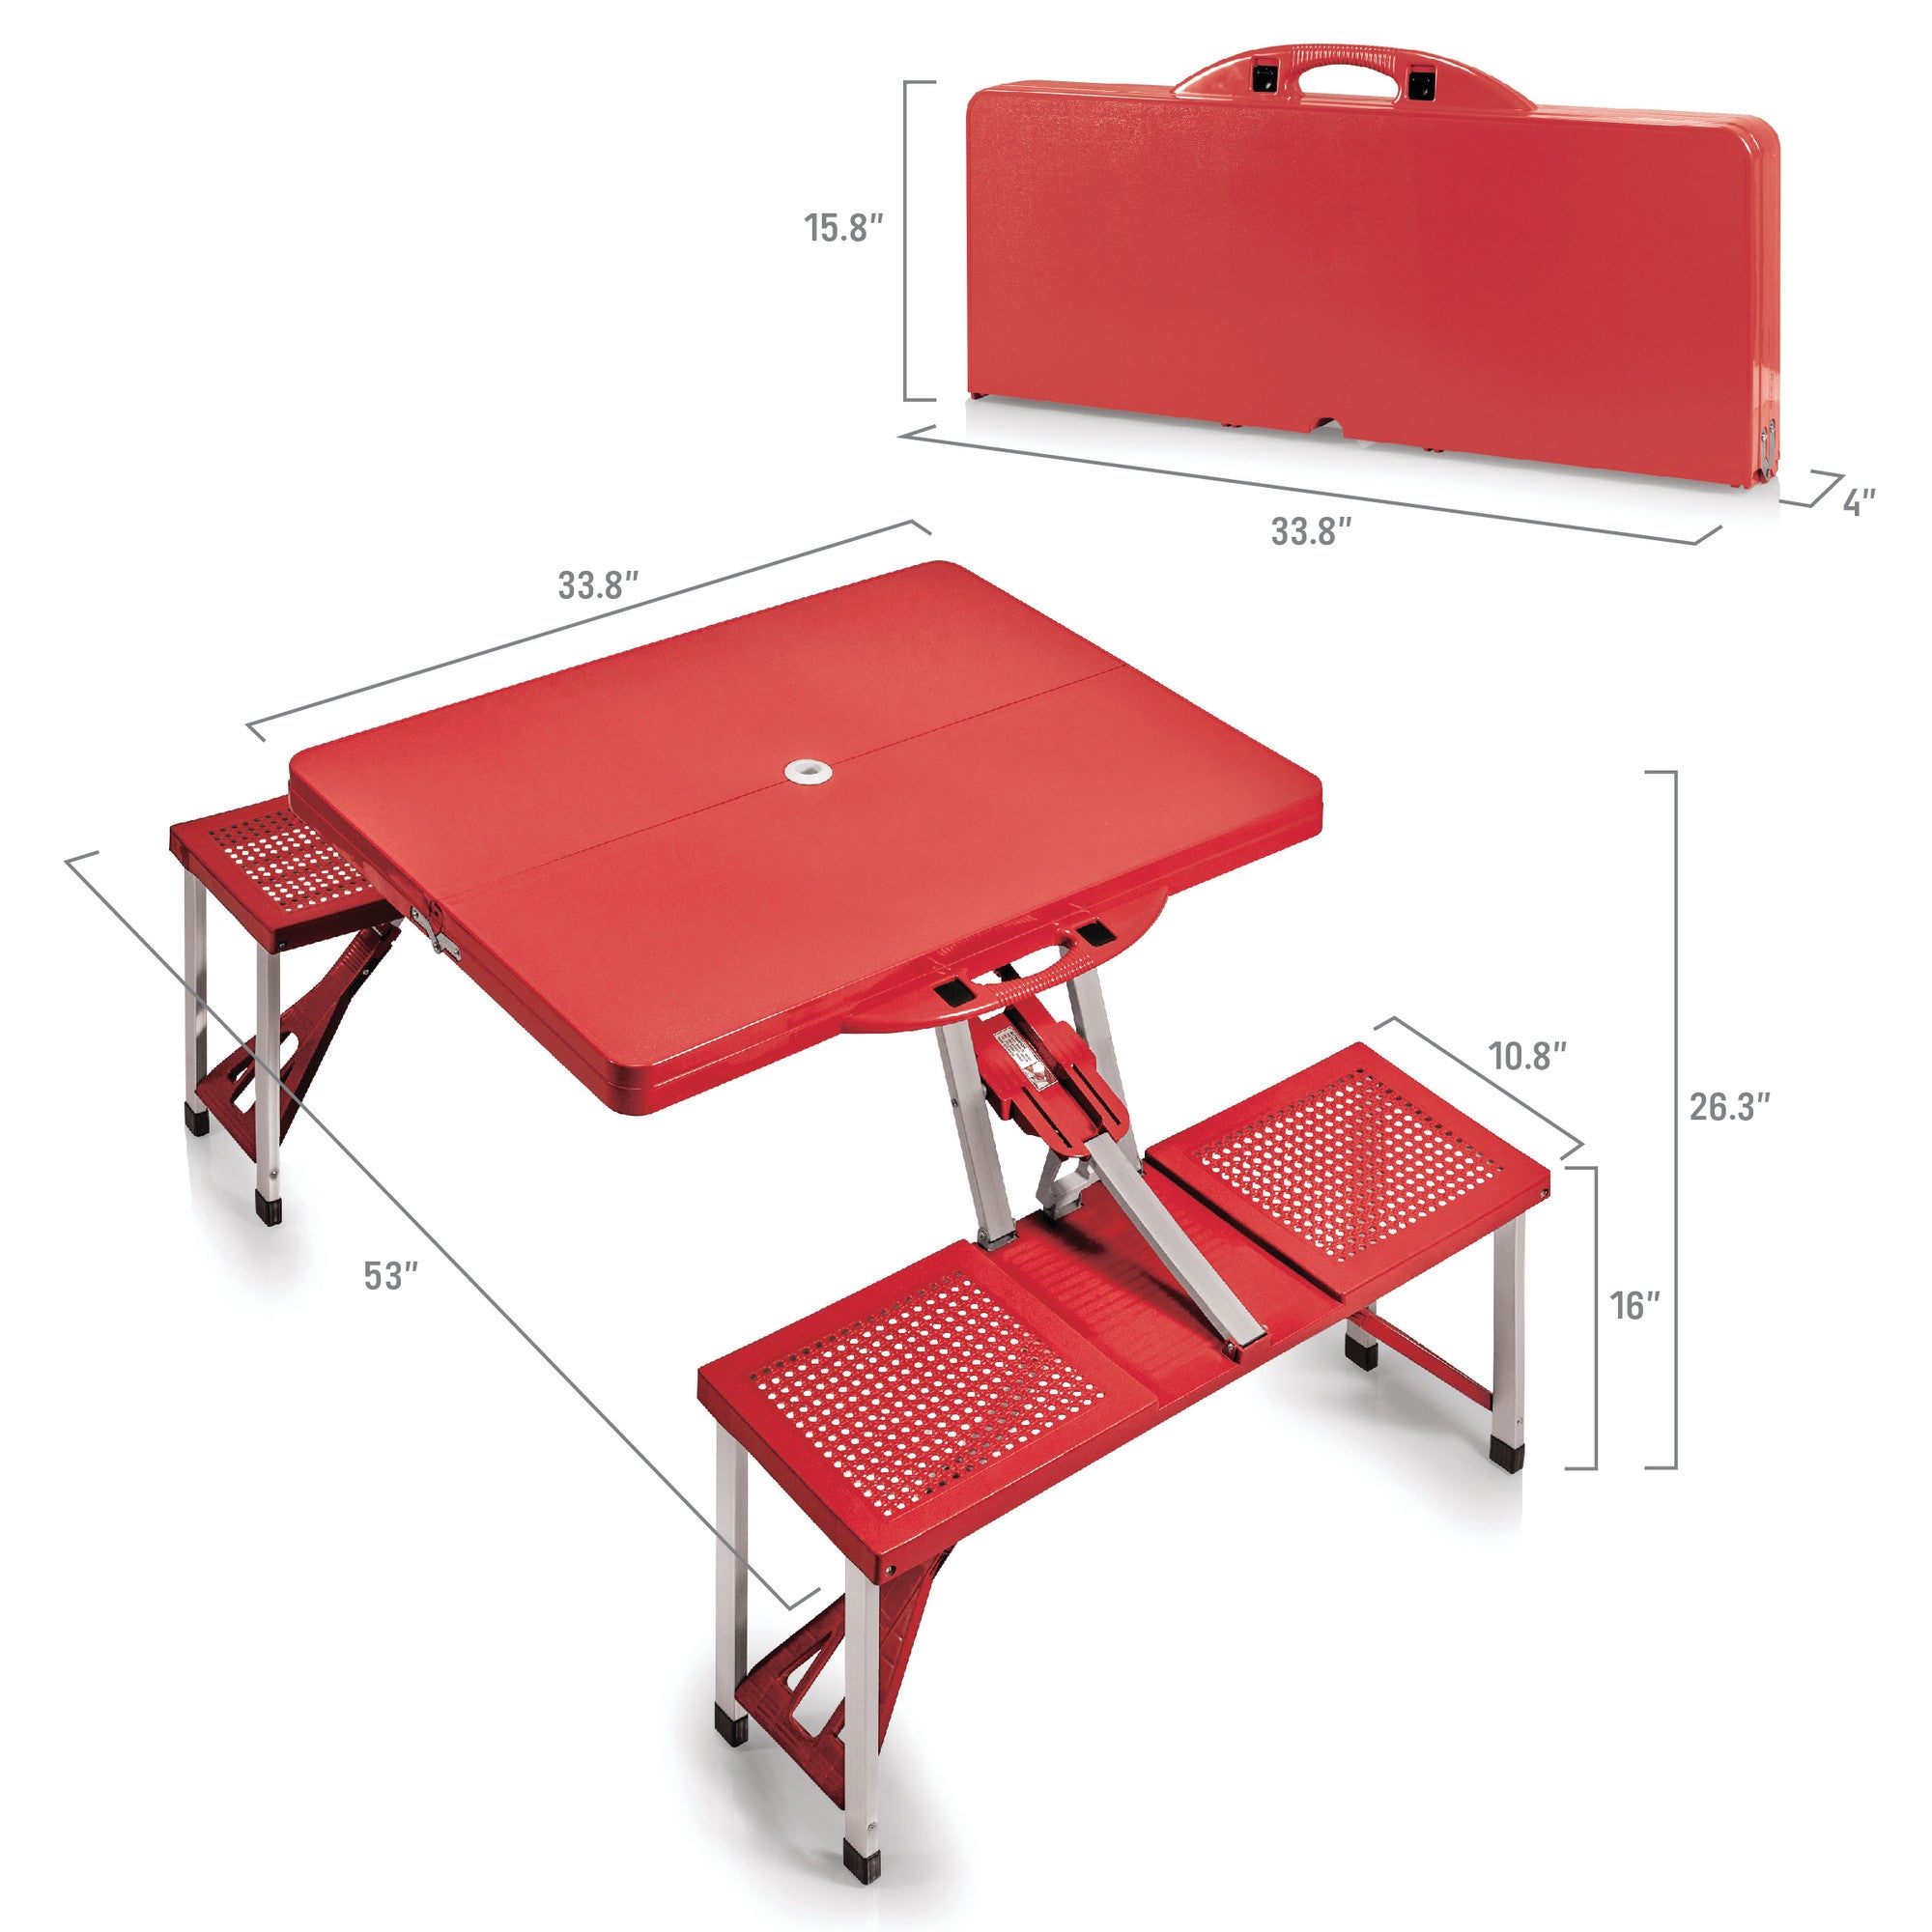 Cornell Big Red - Picnic Table Portable Folding Table with Seats